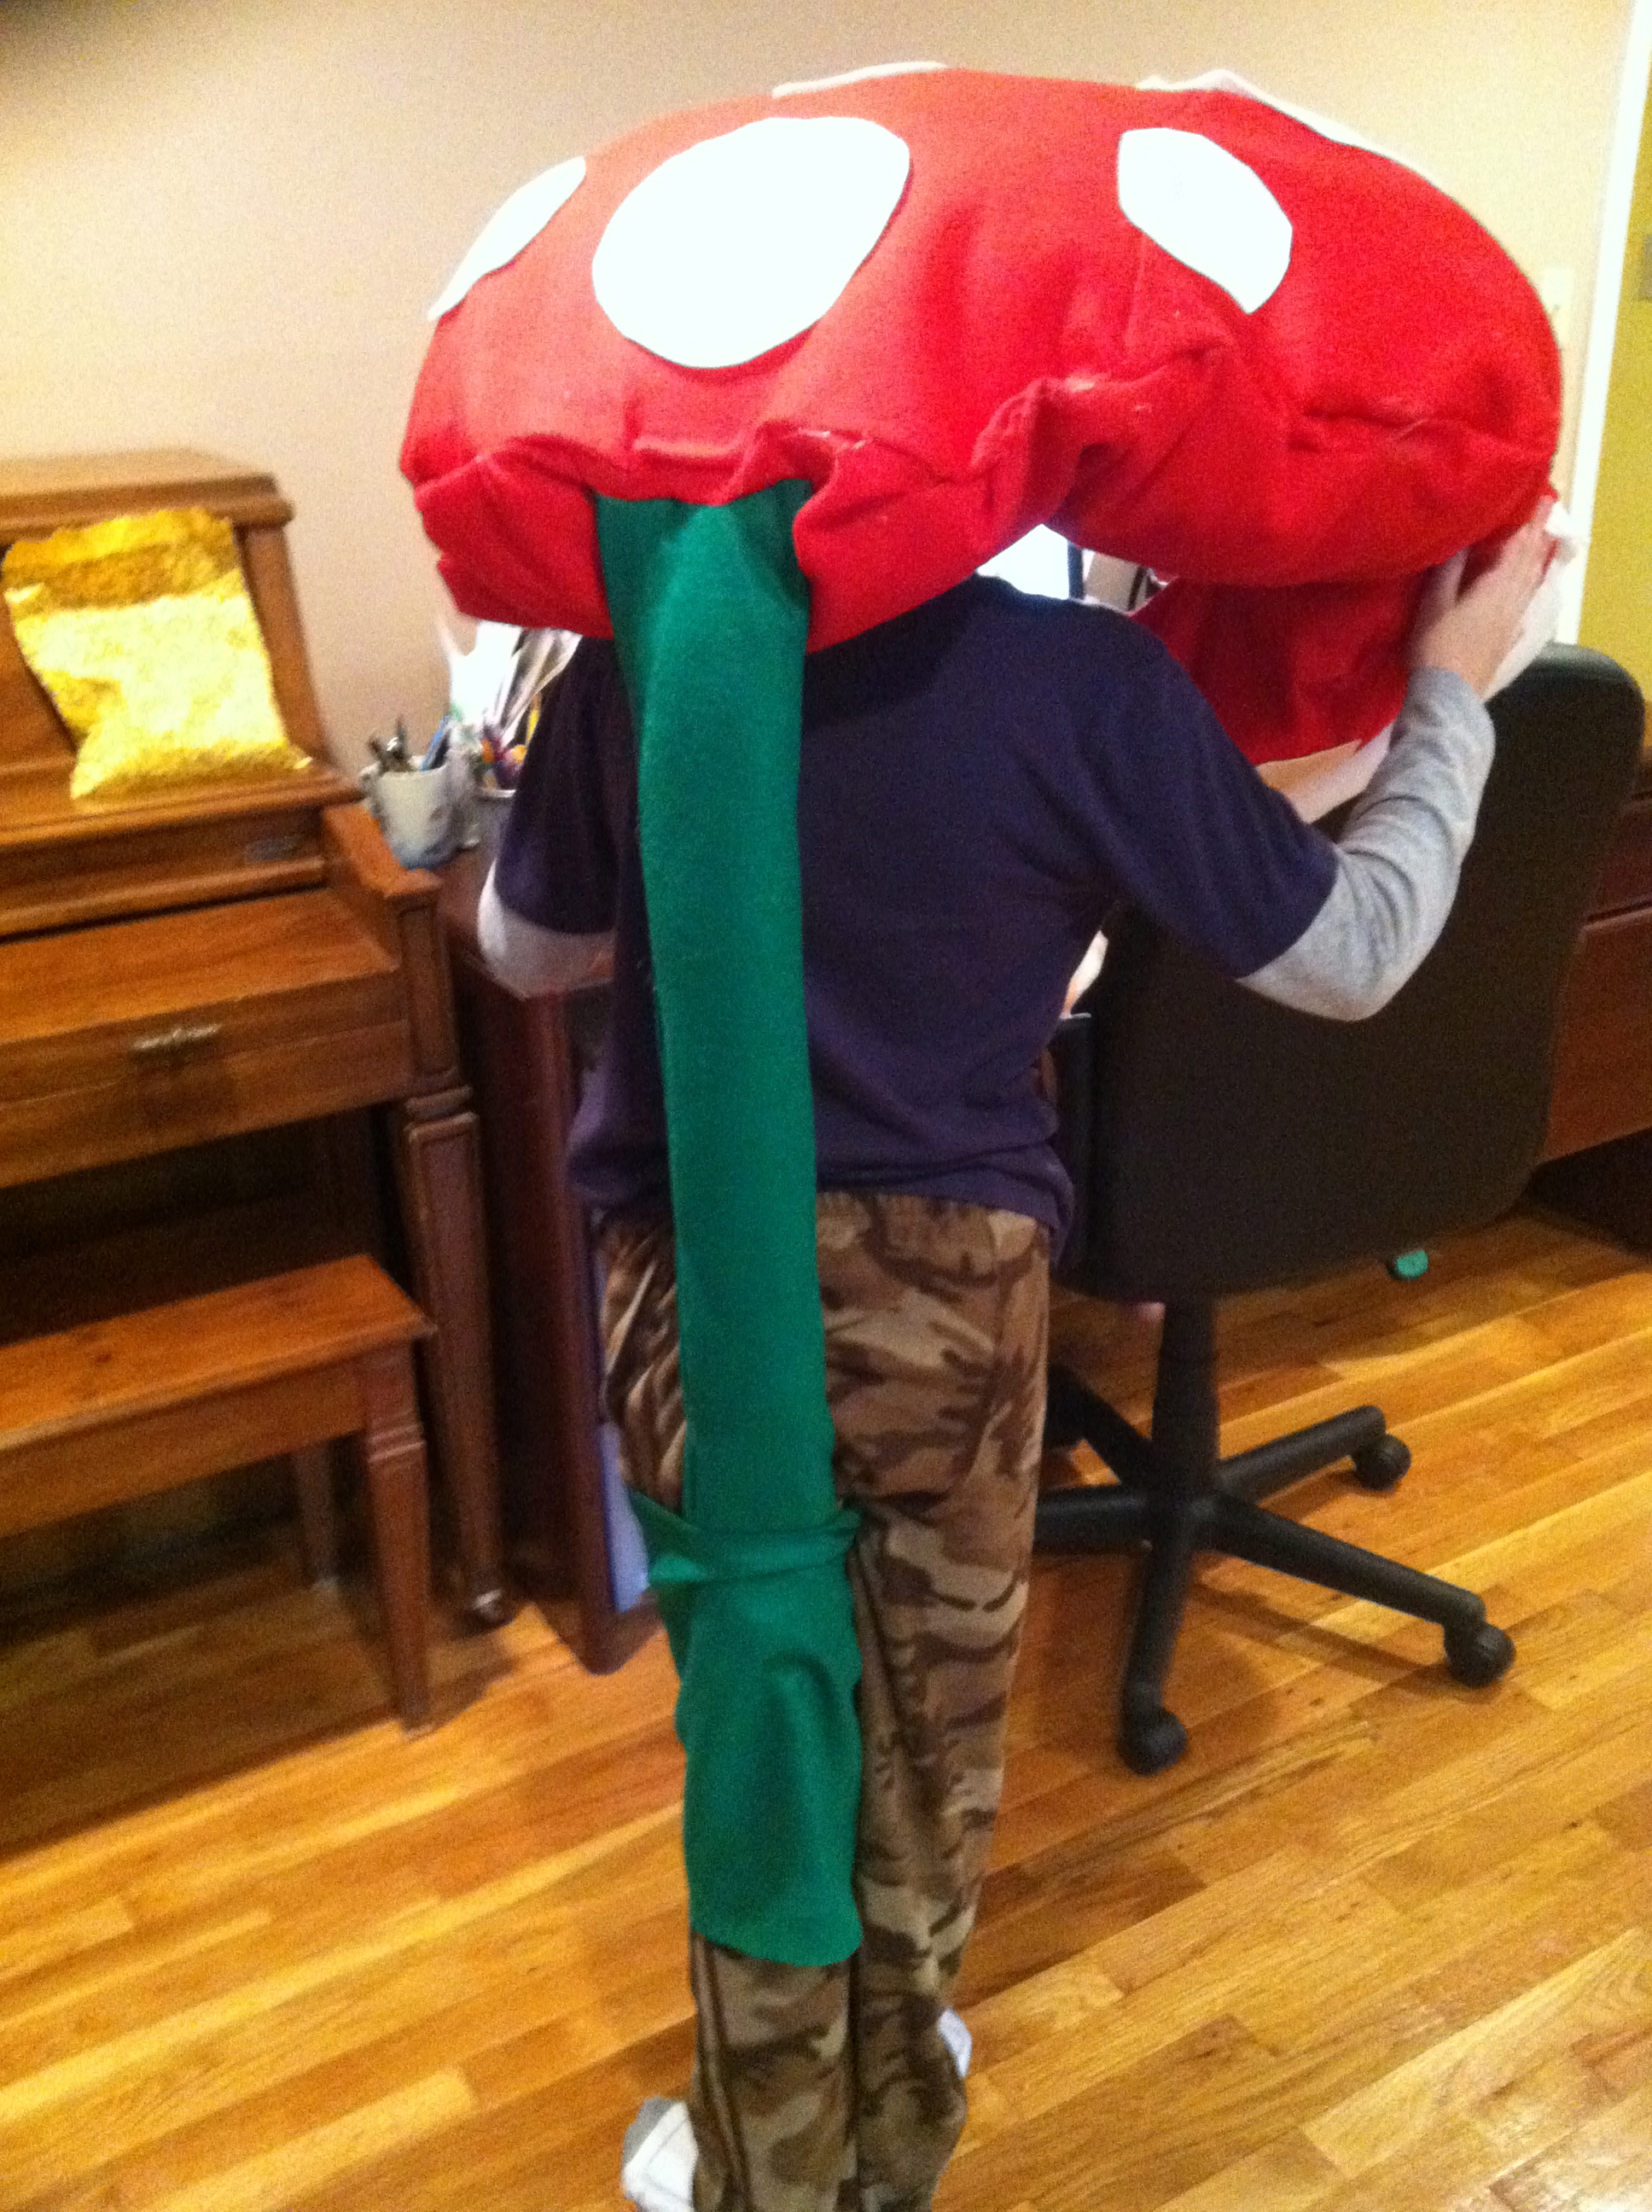 Adding the tail to the piranha plant costume